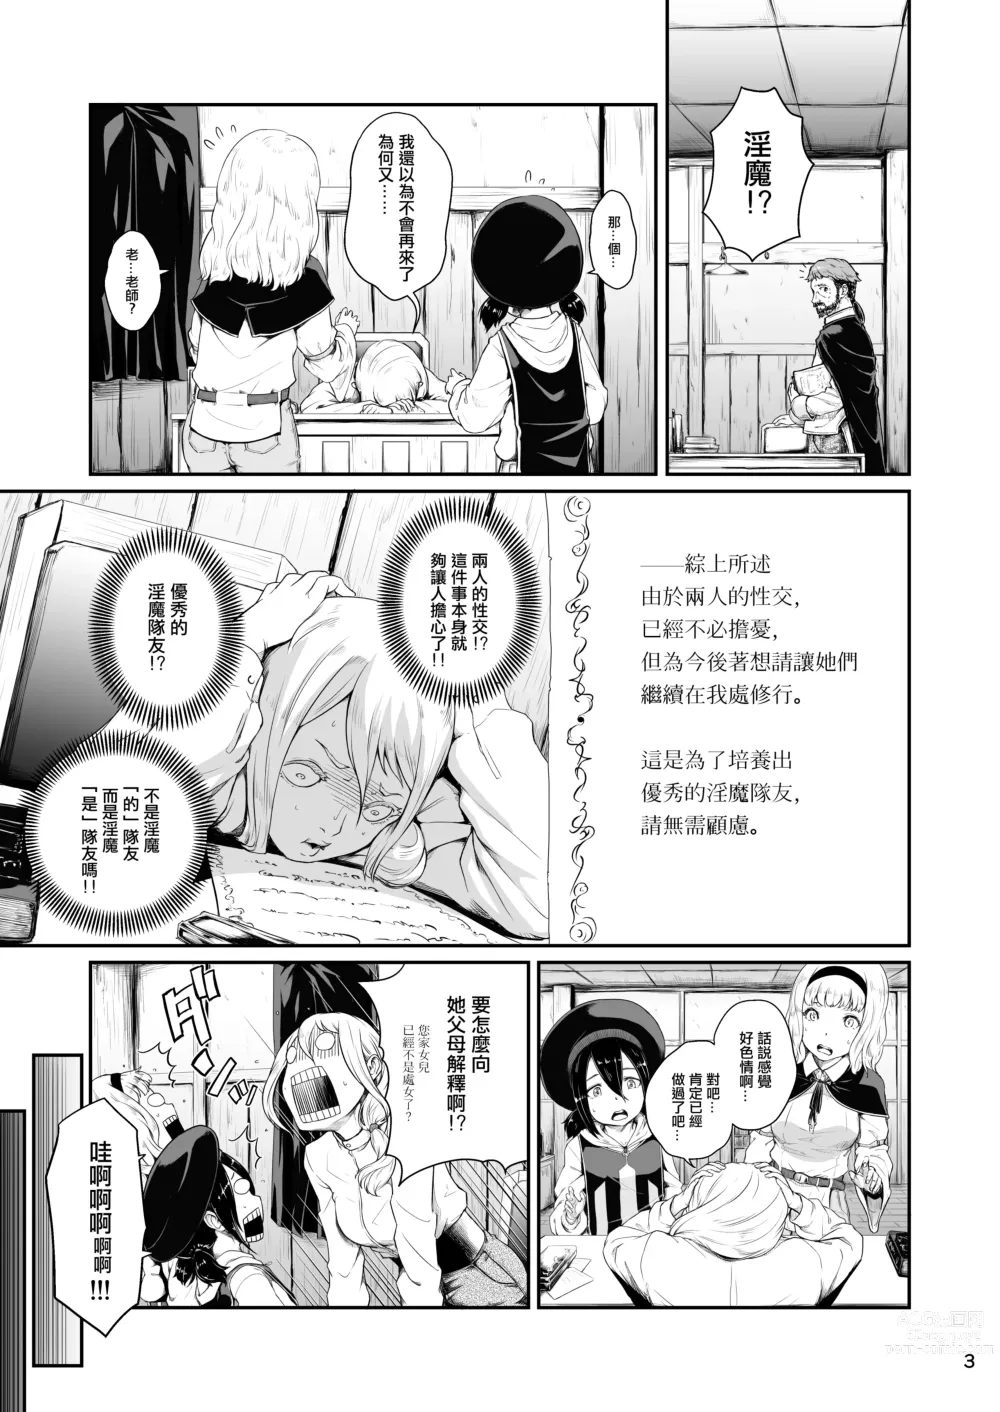 Page 4 of doujinshi 觸手訓練師! Episode 6